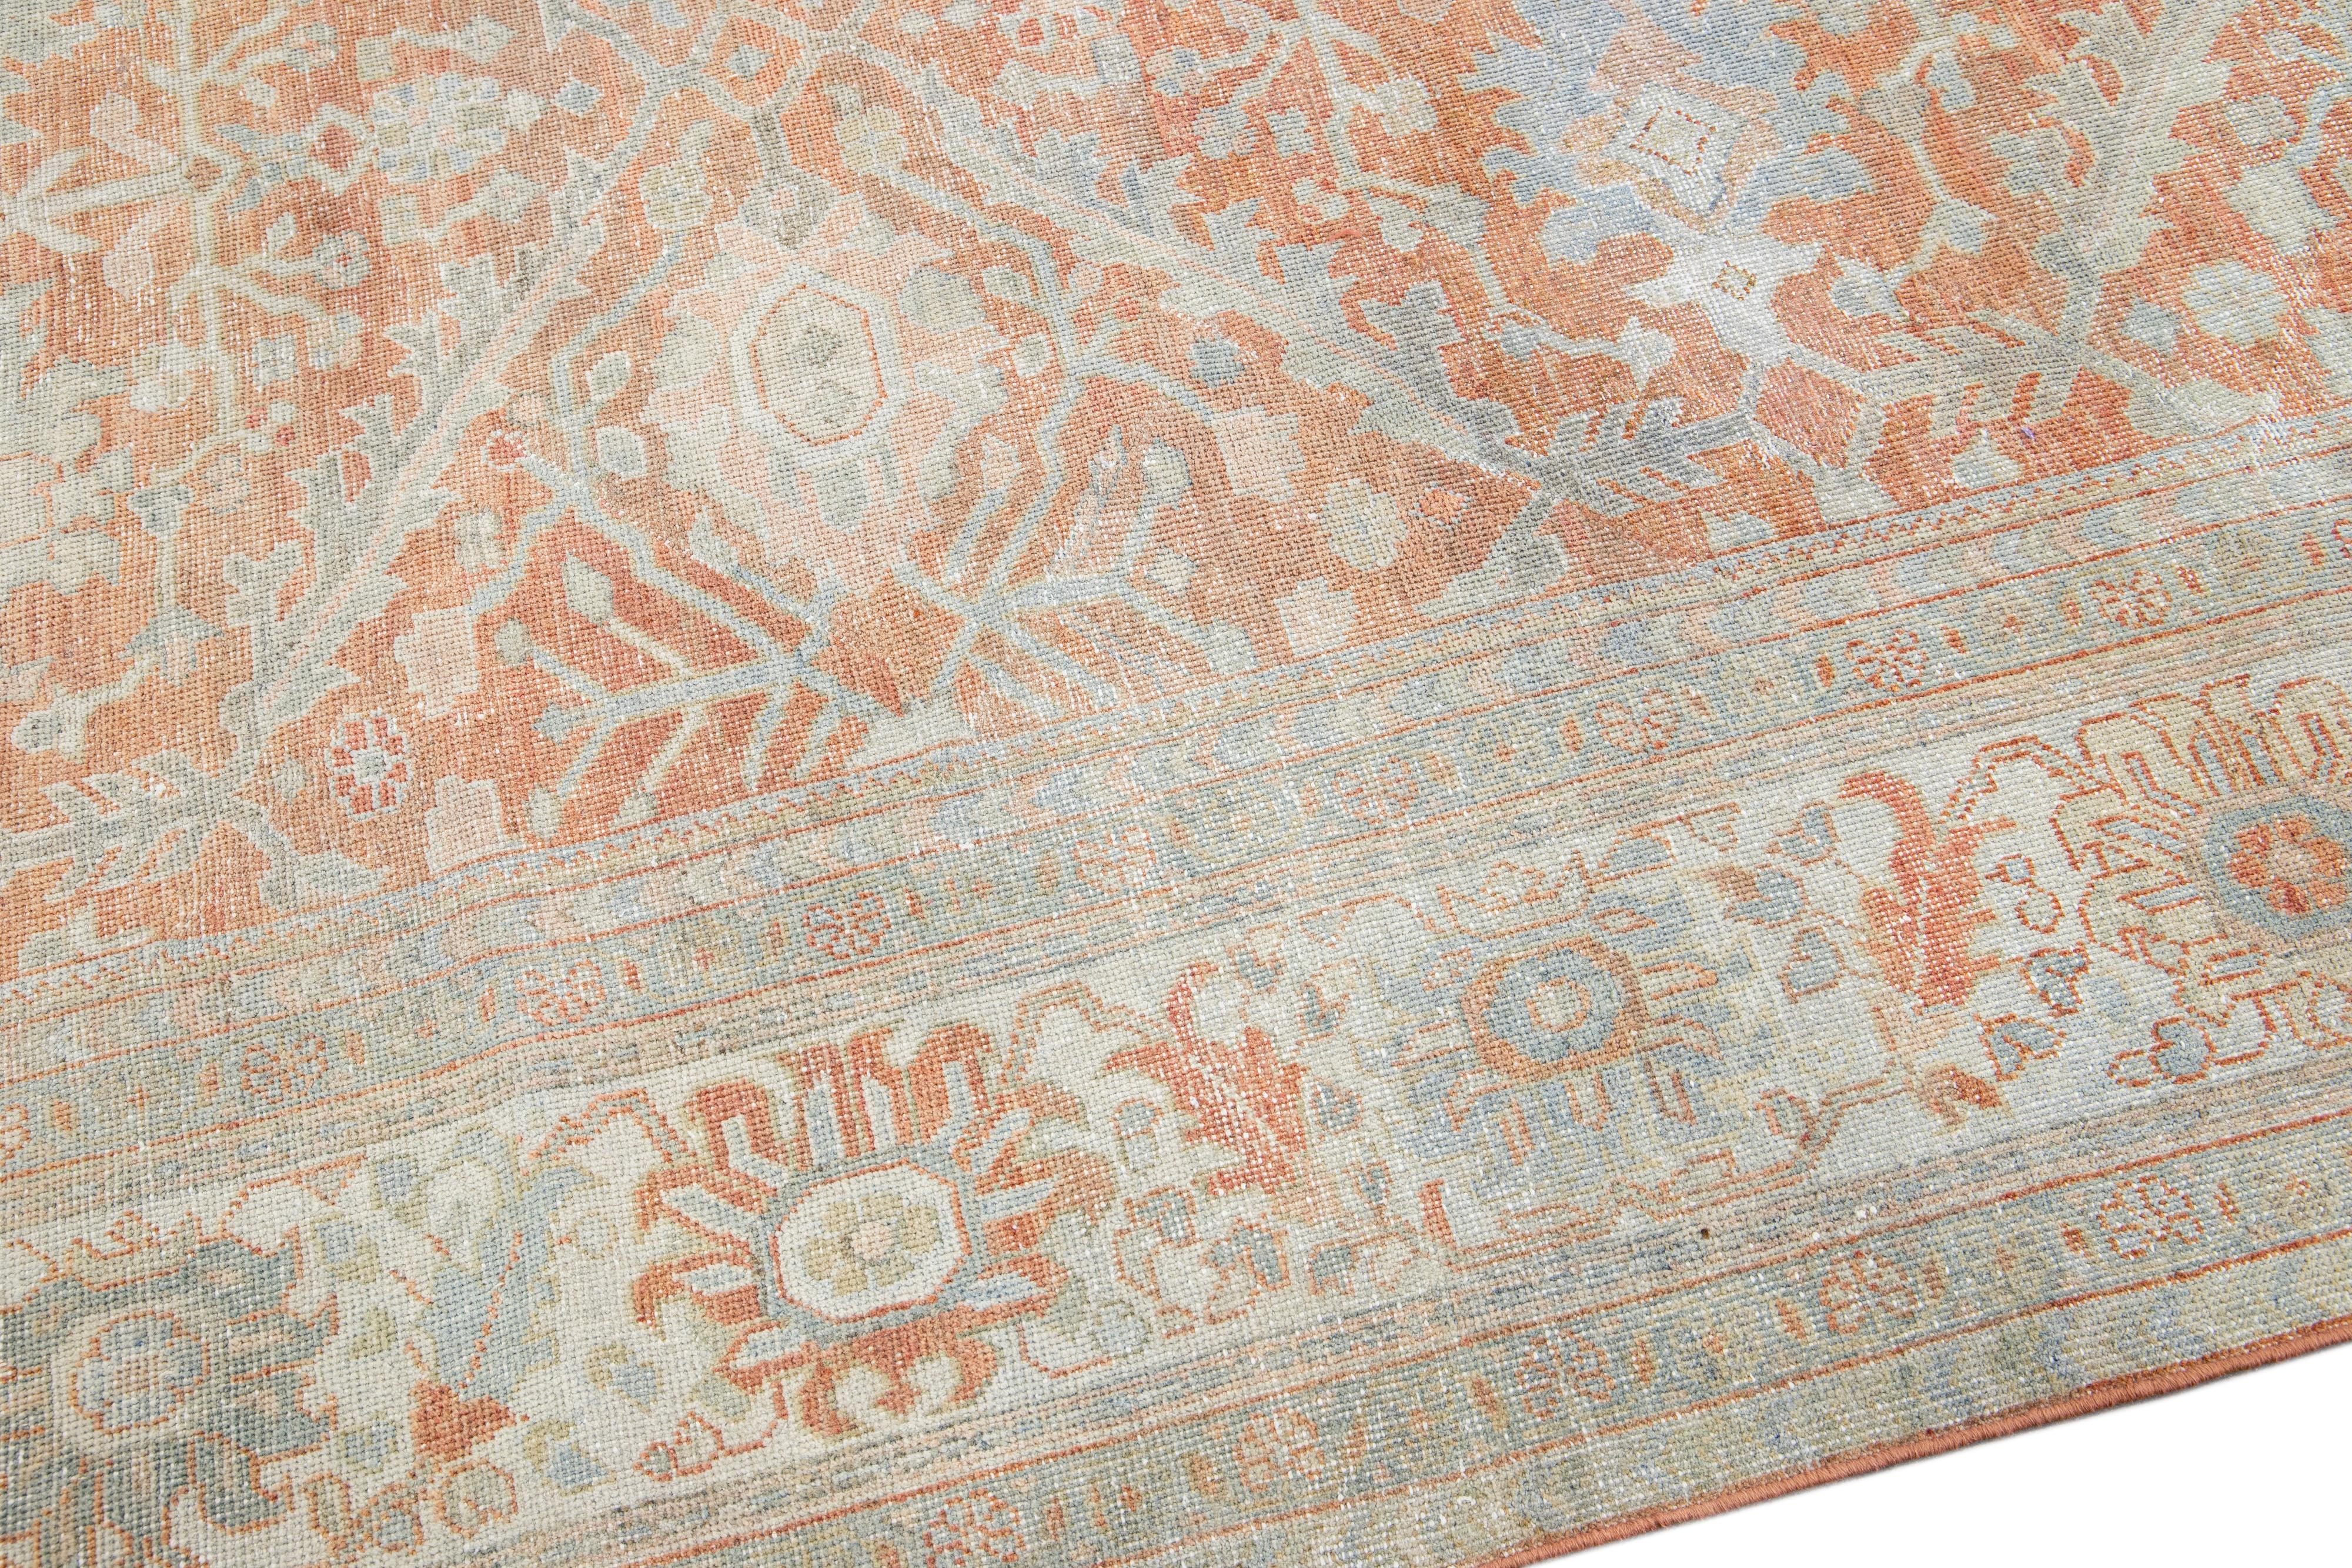 Antique Sultanabad Handmade Floral Pattern Orange Wool Rug In Good Condition For Sale In Norwalk, CT